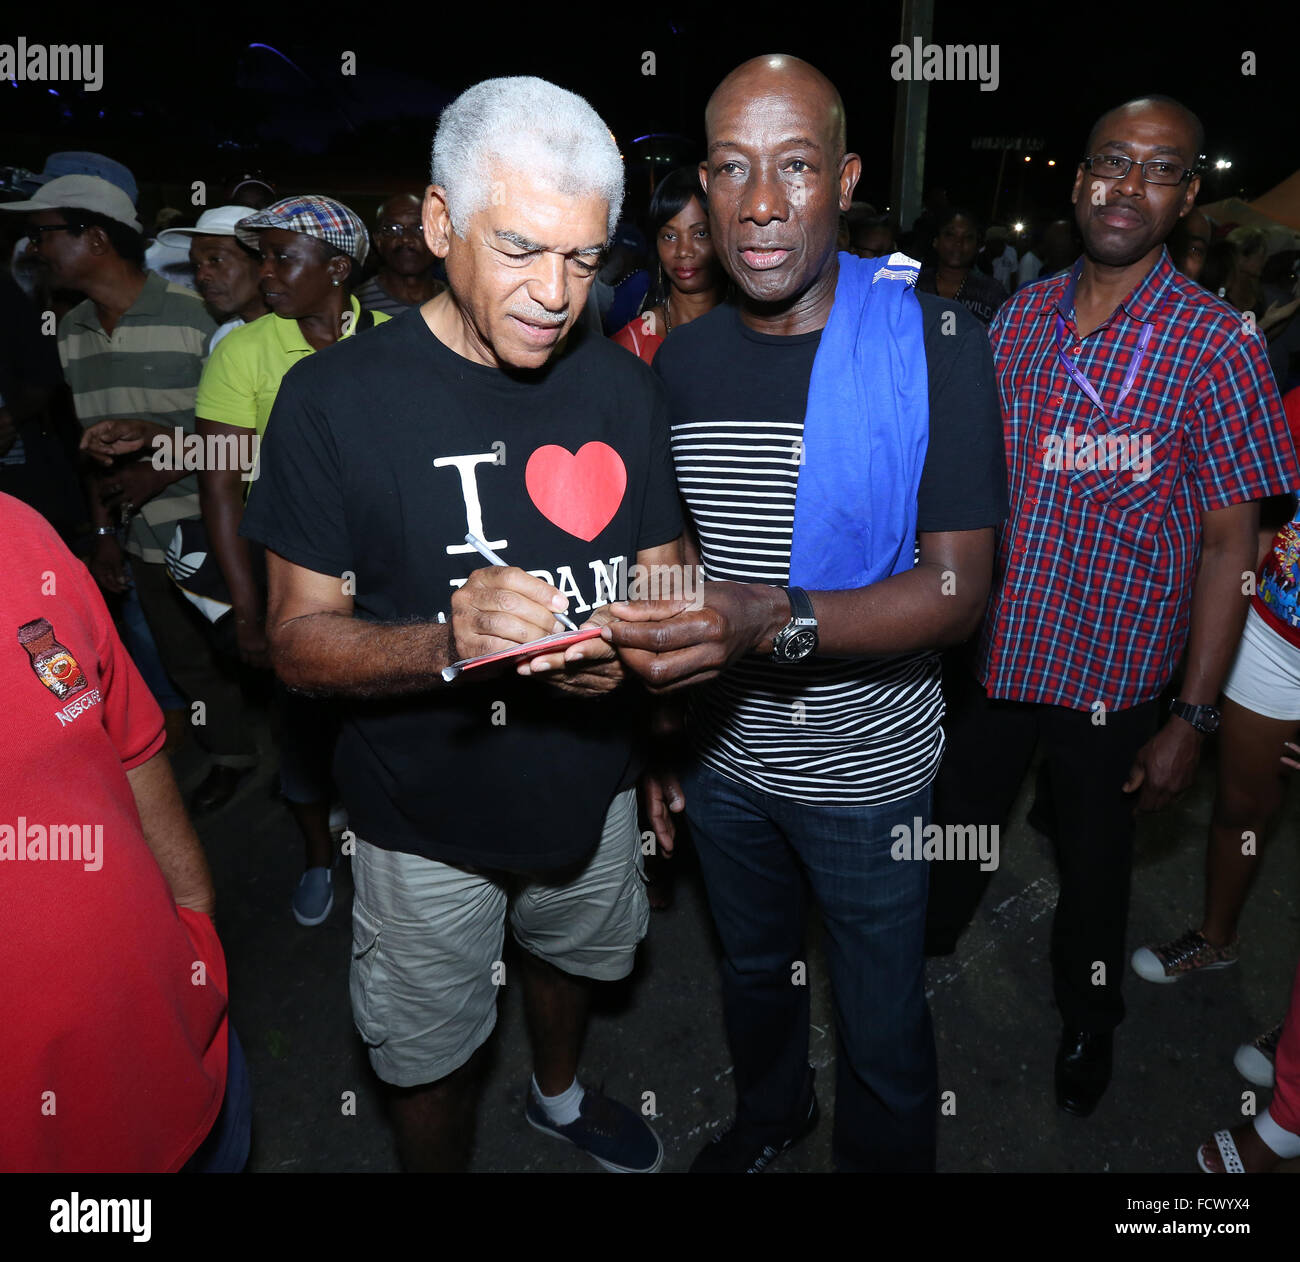 Port of Spain, Trinidad. 24th January, 2016. Keith Christopher Rowley (C), Prime Minister of Trinidad & Tobago, talks with famed steel pan arranger Ray Holman at the semi-finals of Panorama in the Queen's Park Savannah during Carnival in Port of Spain, Trinidad on Sunday January 24, 2016. (Photo by Sean Drakes/Alamy Live News) Stock Photo